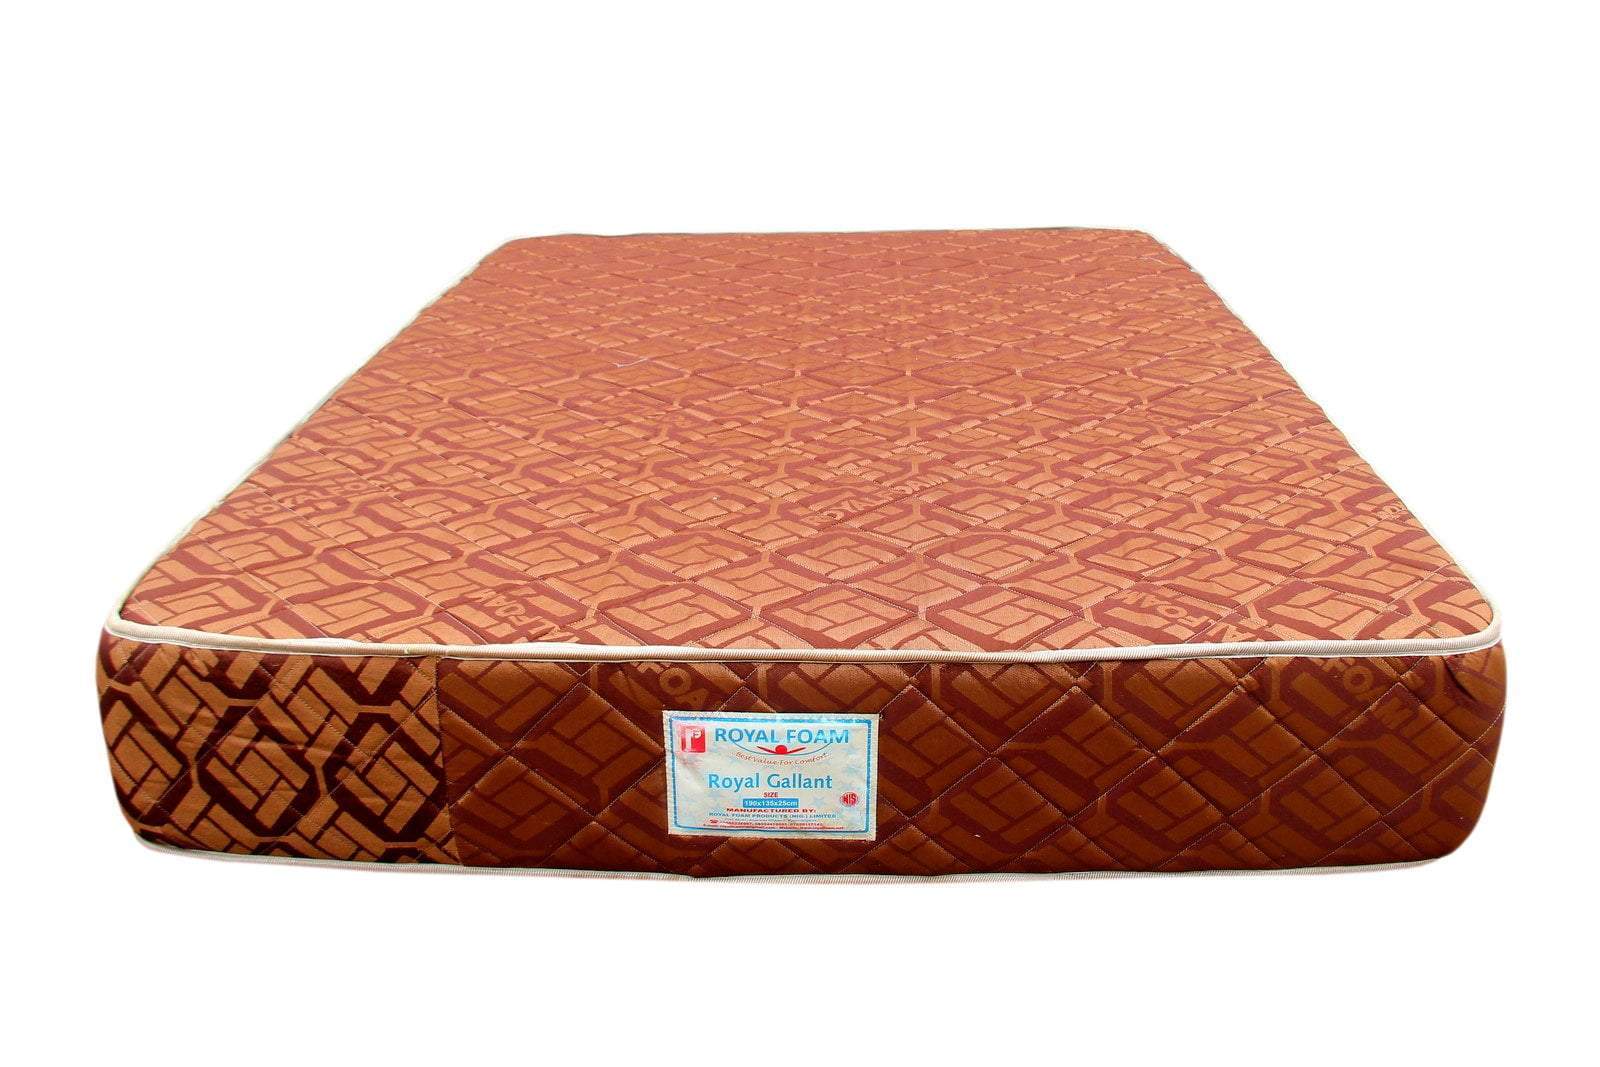 Royal Gallant JACQUARD fabric-Fully Quilted Mattress190 X 150 X 30 CM(6ft x 5ft x 12inches) Double(Lagos Only)